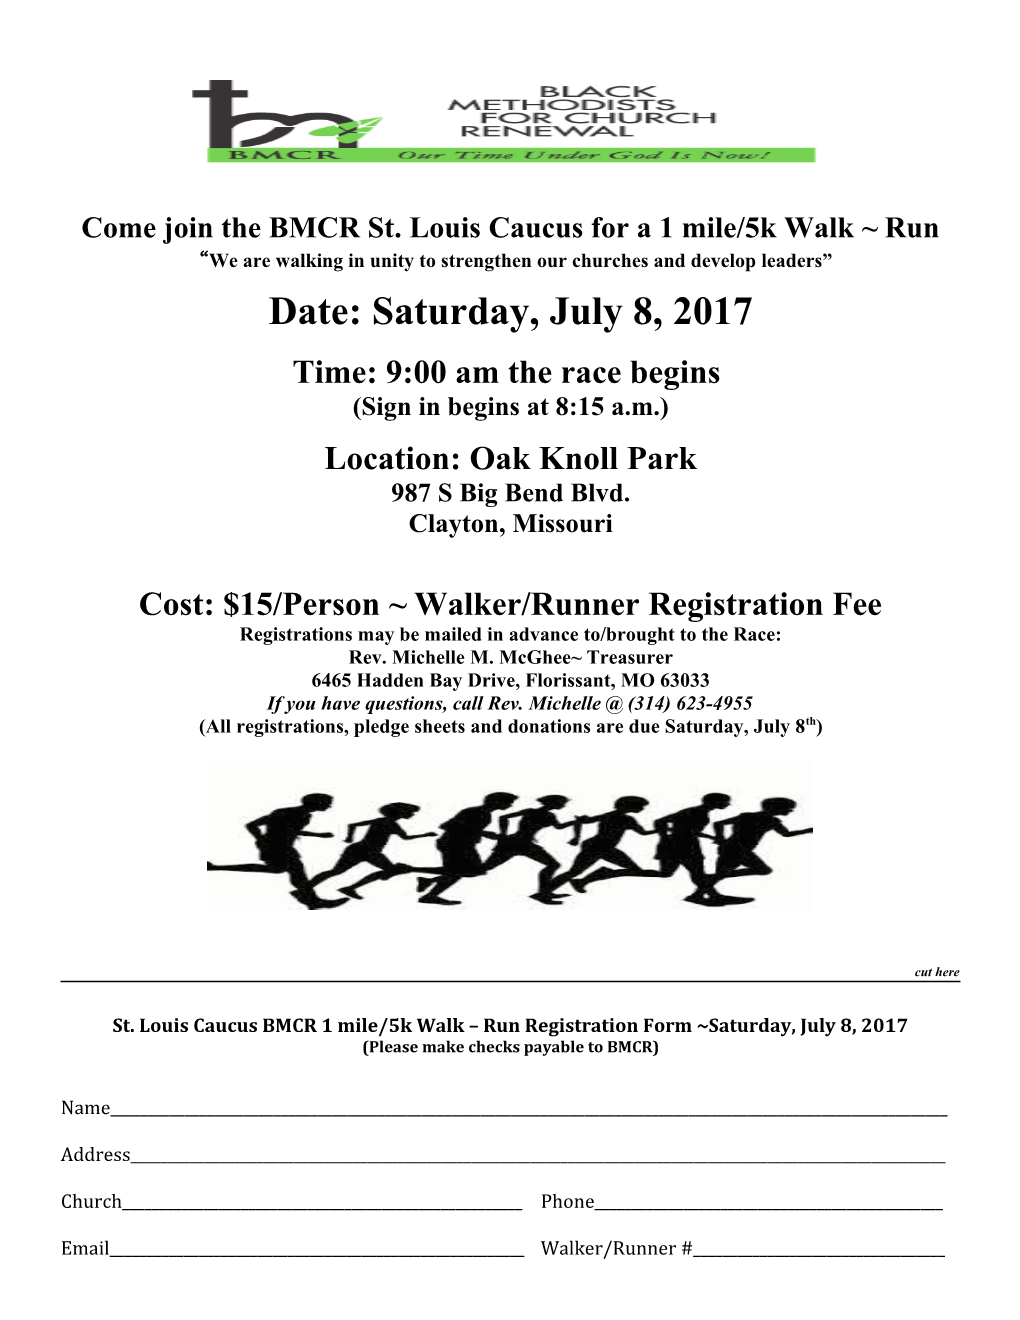 Come Join the BMCR St. Louis Caucus for a 1 Mile/5K Walk Run